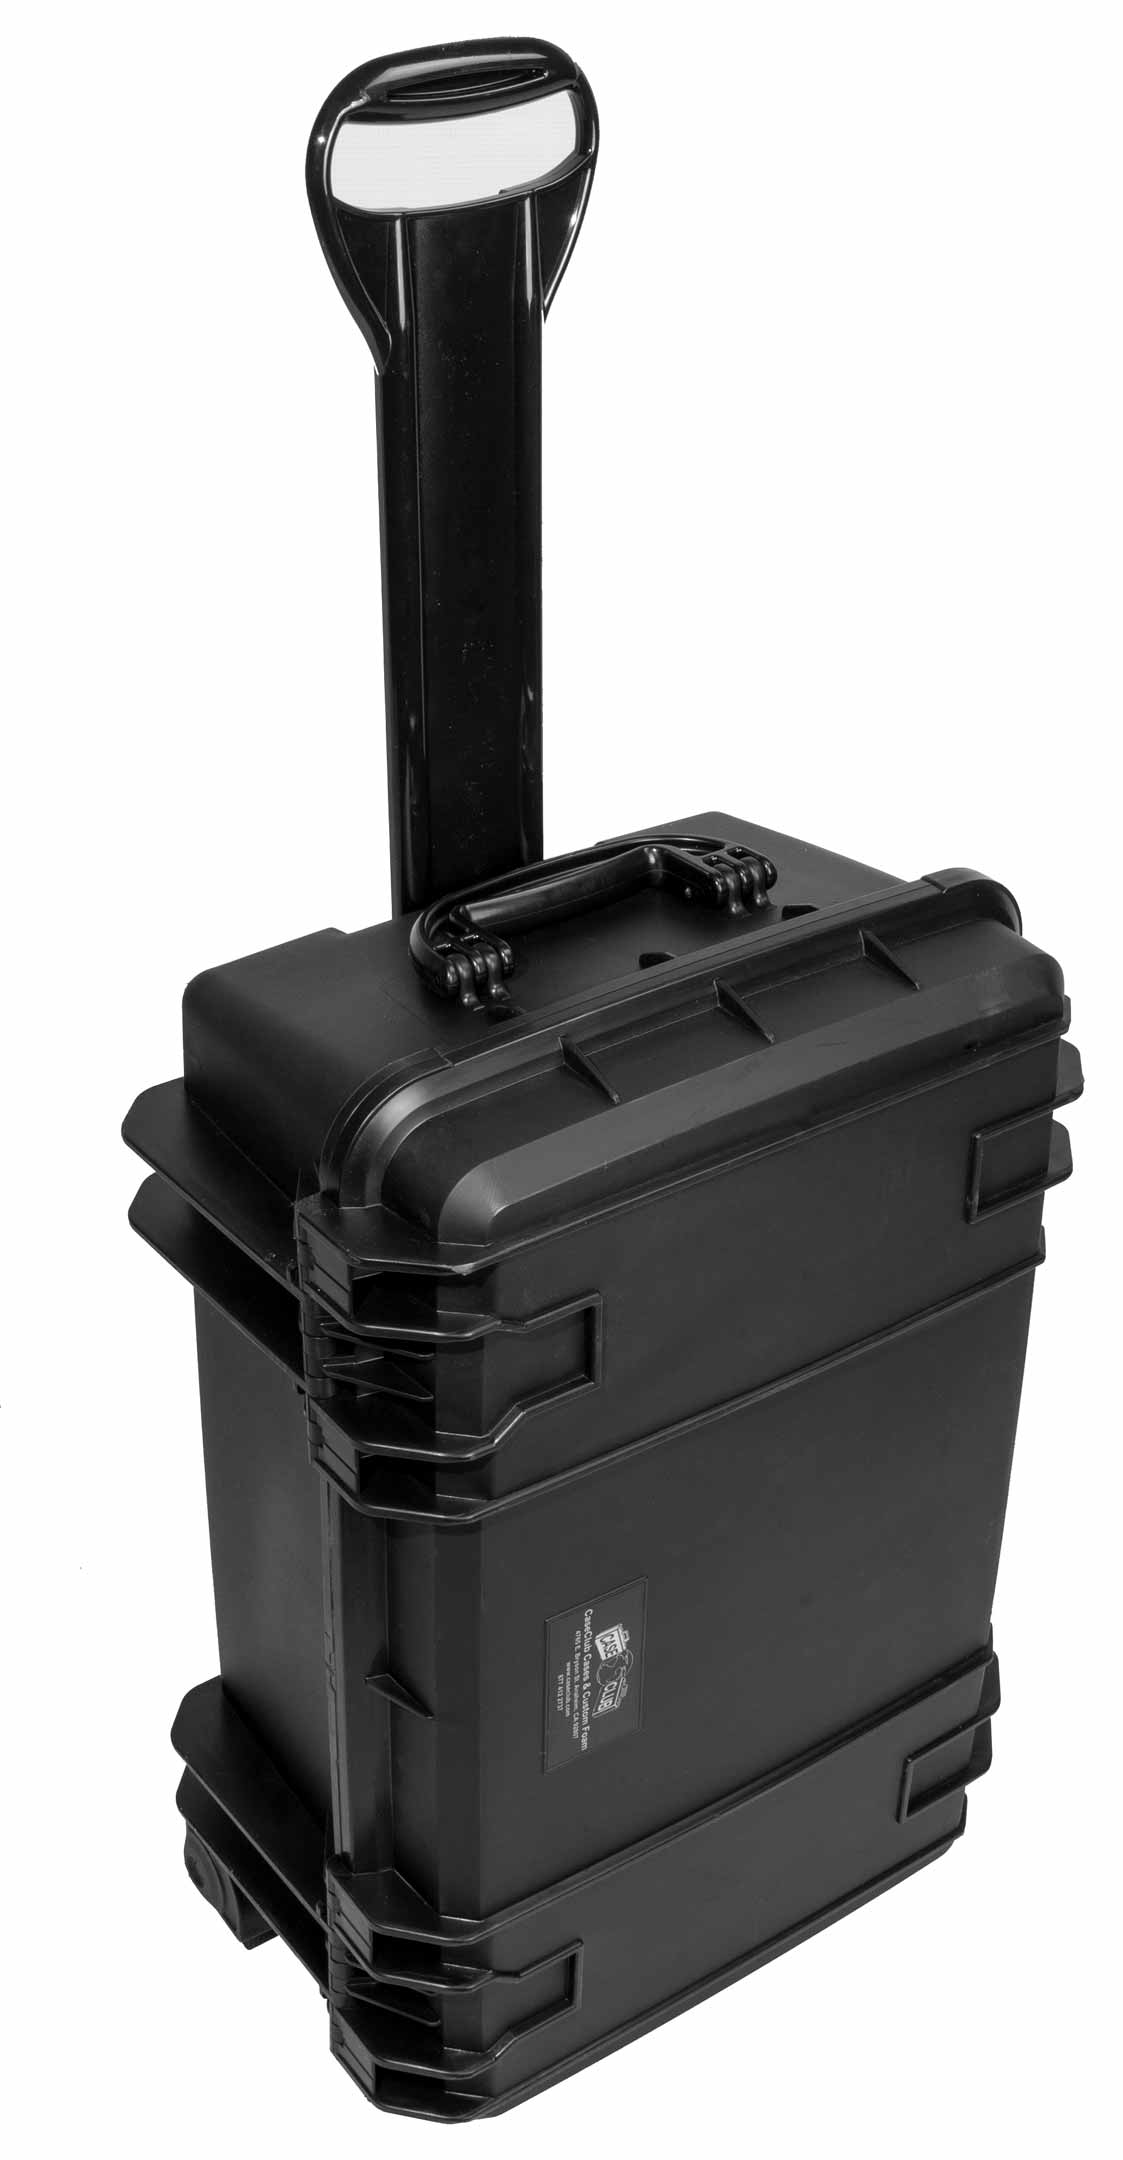 Case Club Portable PC Gaming Chassis with Built-in 24 1ms 144hz Monitor -  Build Your Own High Performance Mobile Desktop Computer in Waterproof